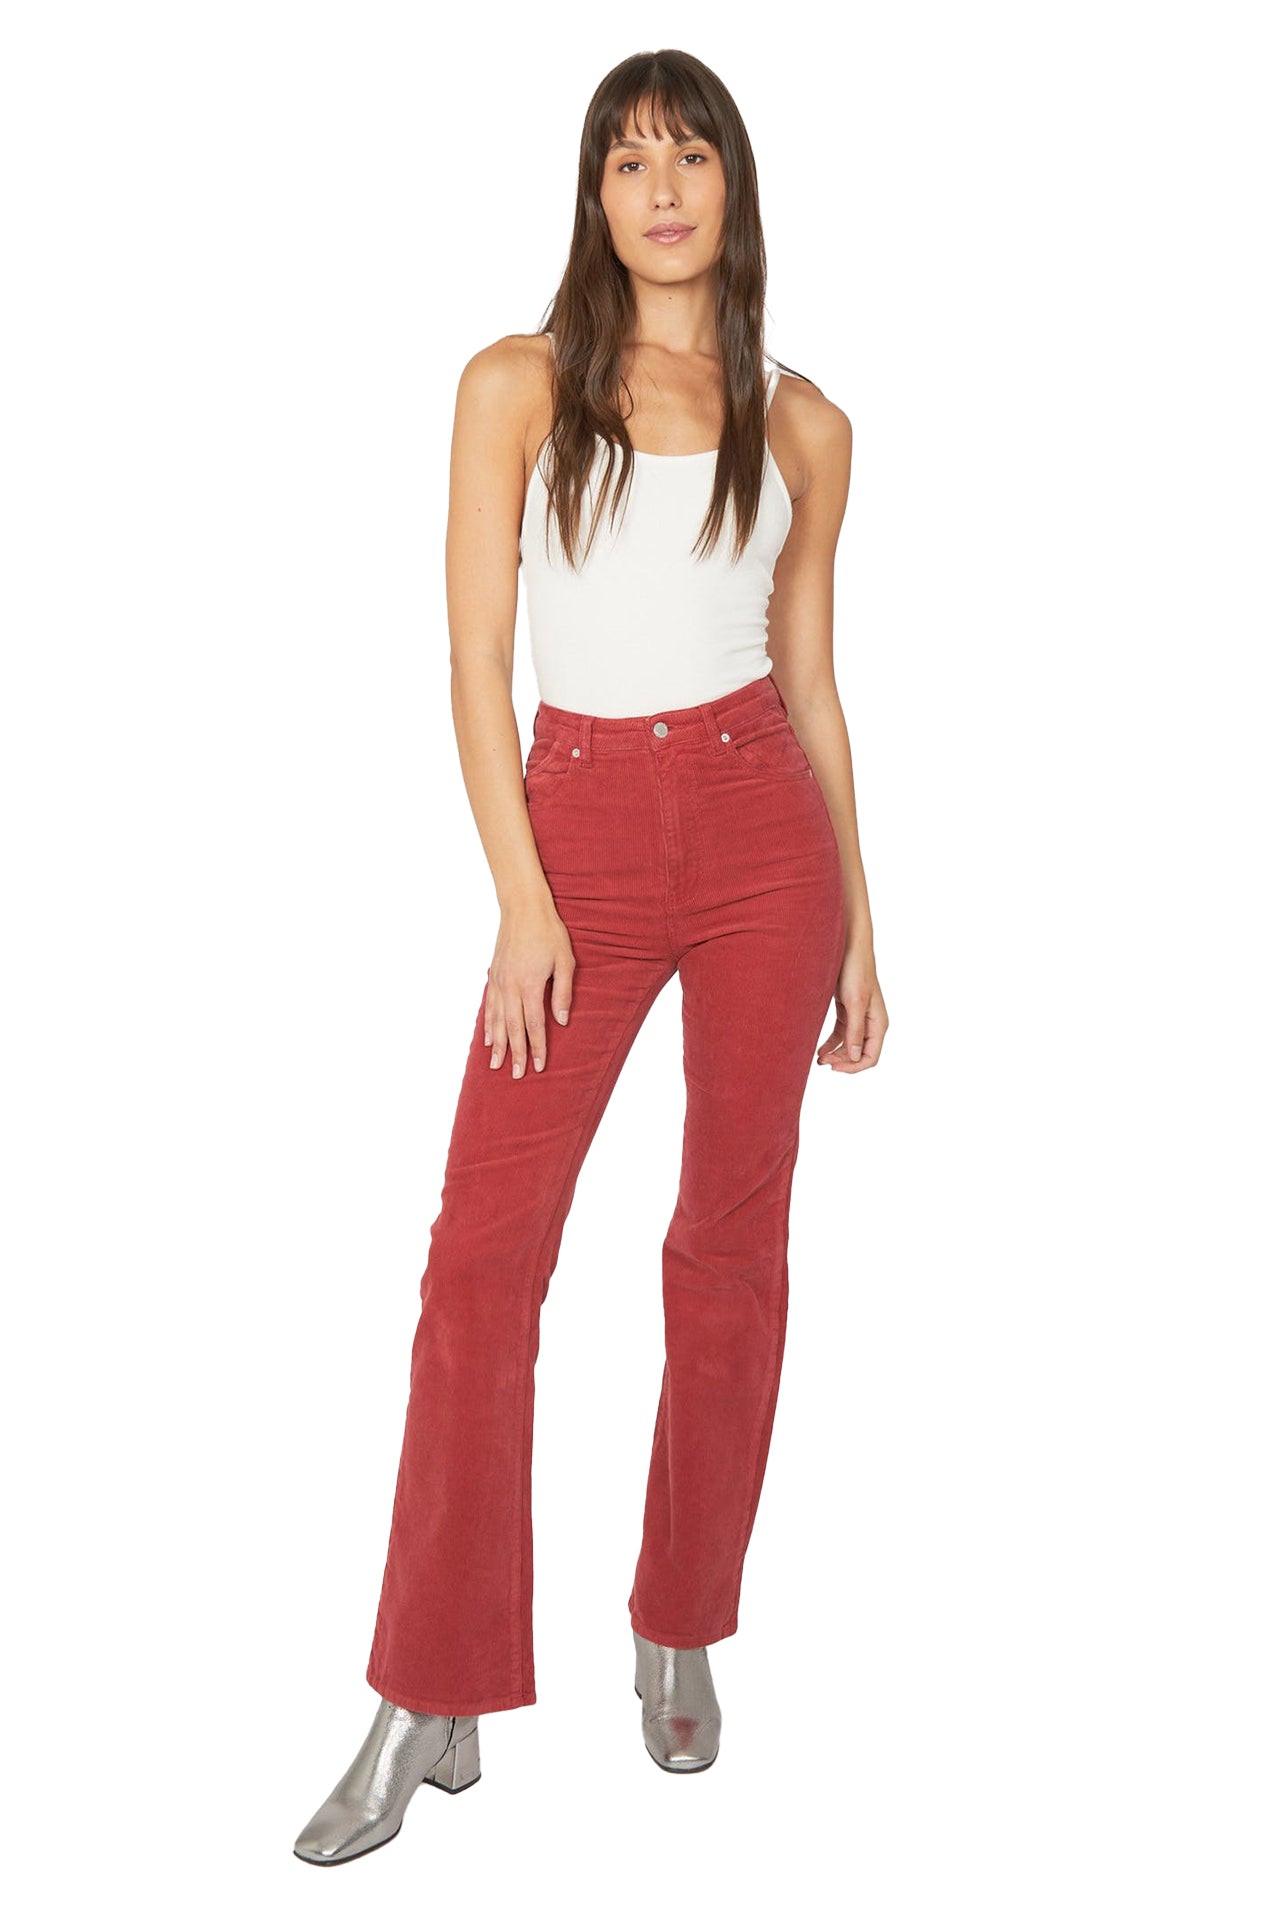 Rollas Dusters Bootcut Cord Ruby 